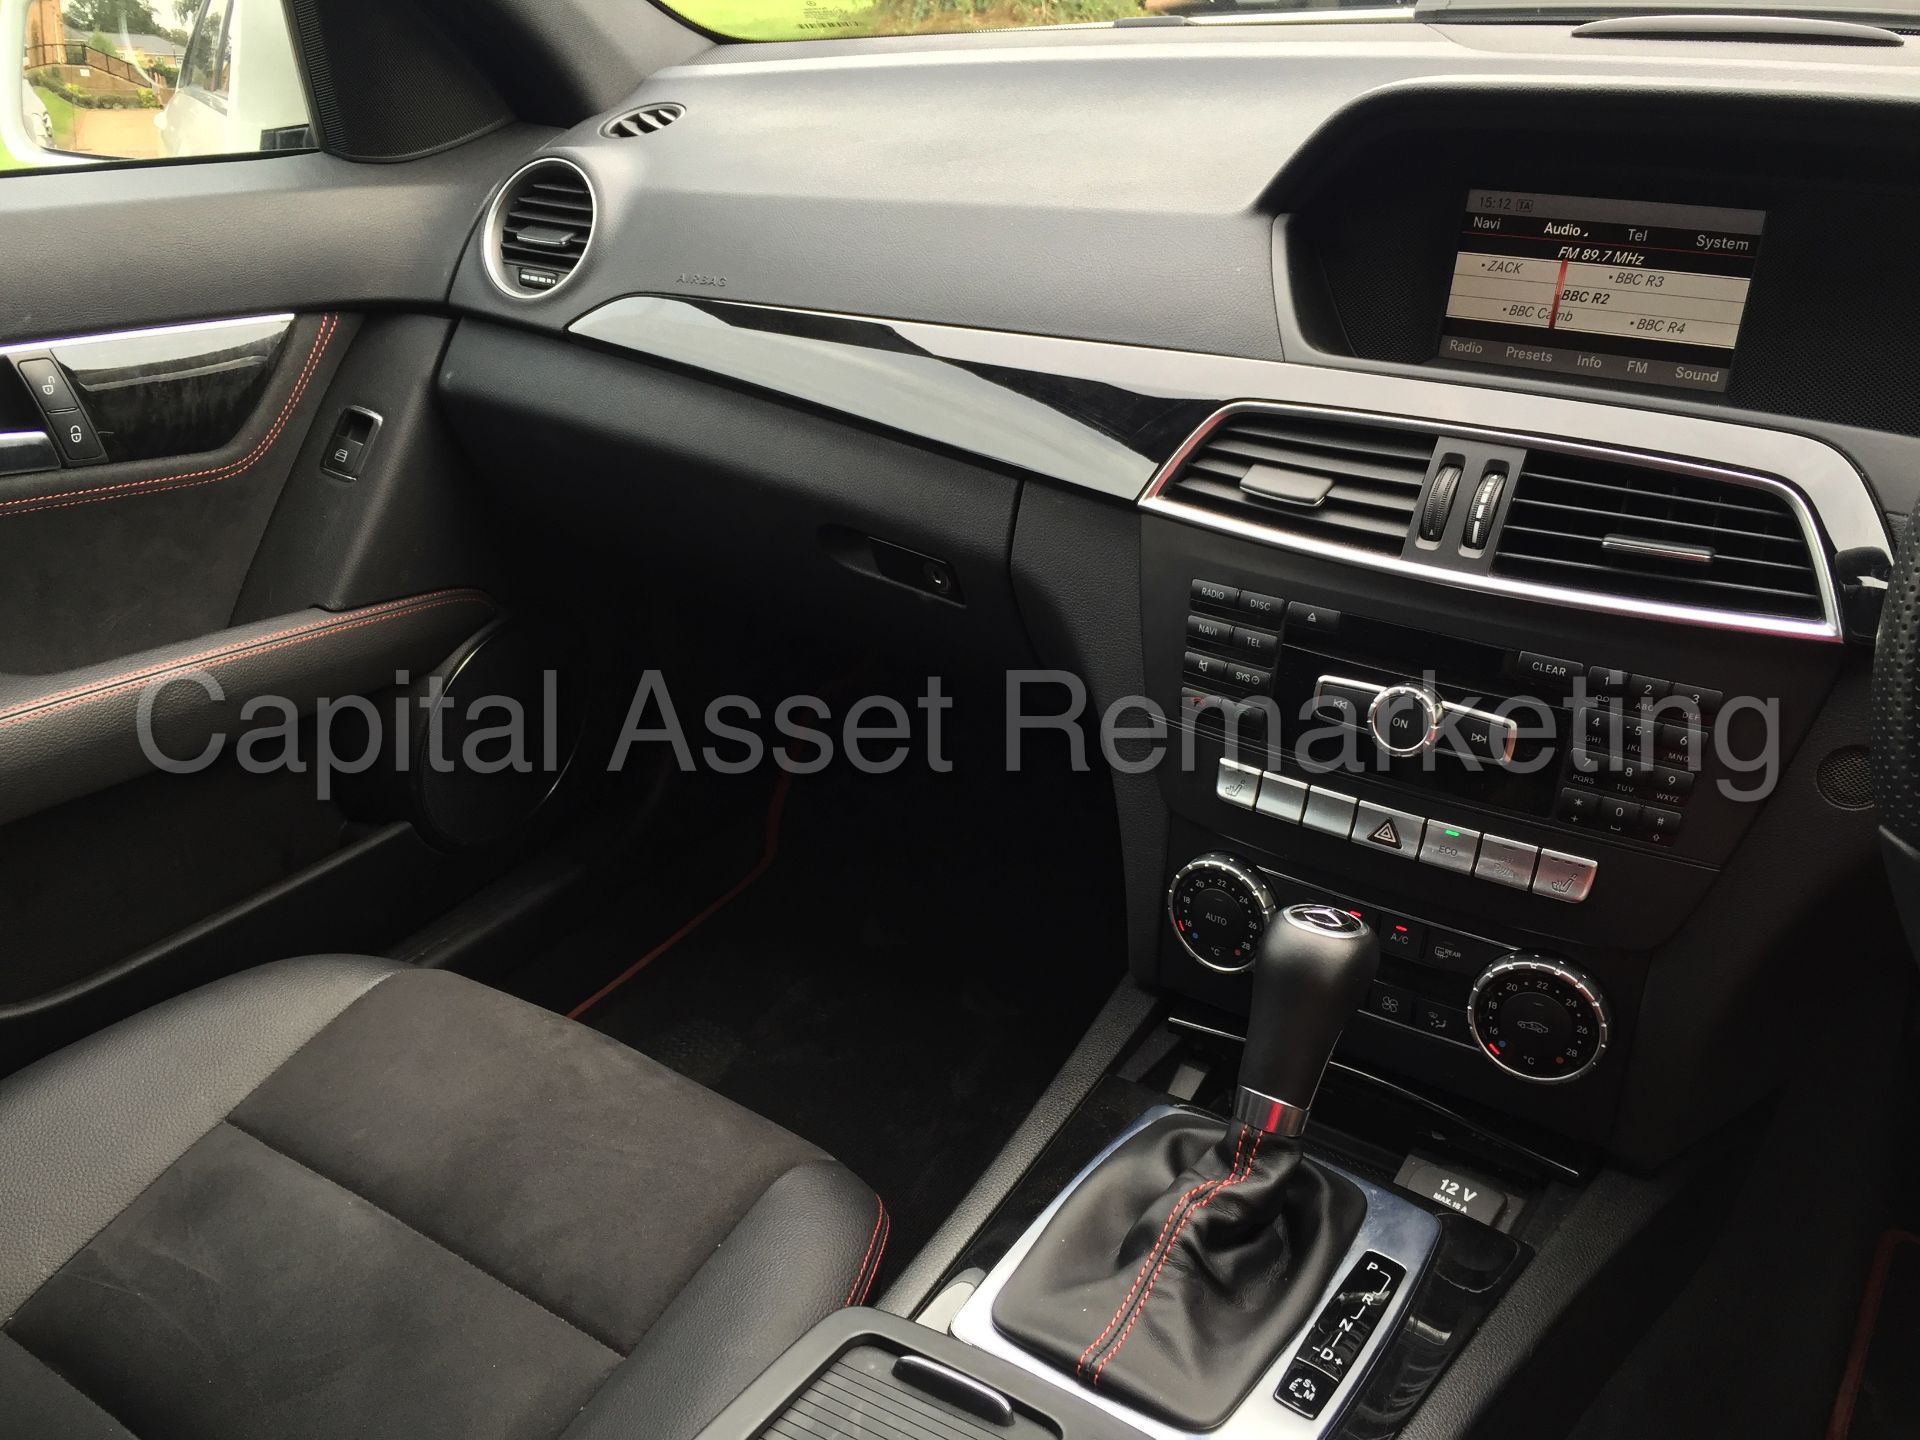 MERCEDES-BENZ C220 CDI 'AMG SPORT PLUS' (2014 MODEL) '7-G AUTO - LEATHER - SAT NAV' (1 OWNER) - Image 18 of 29